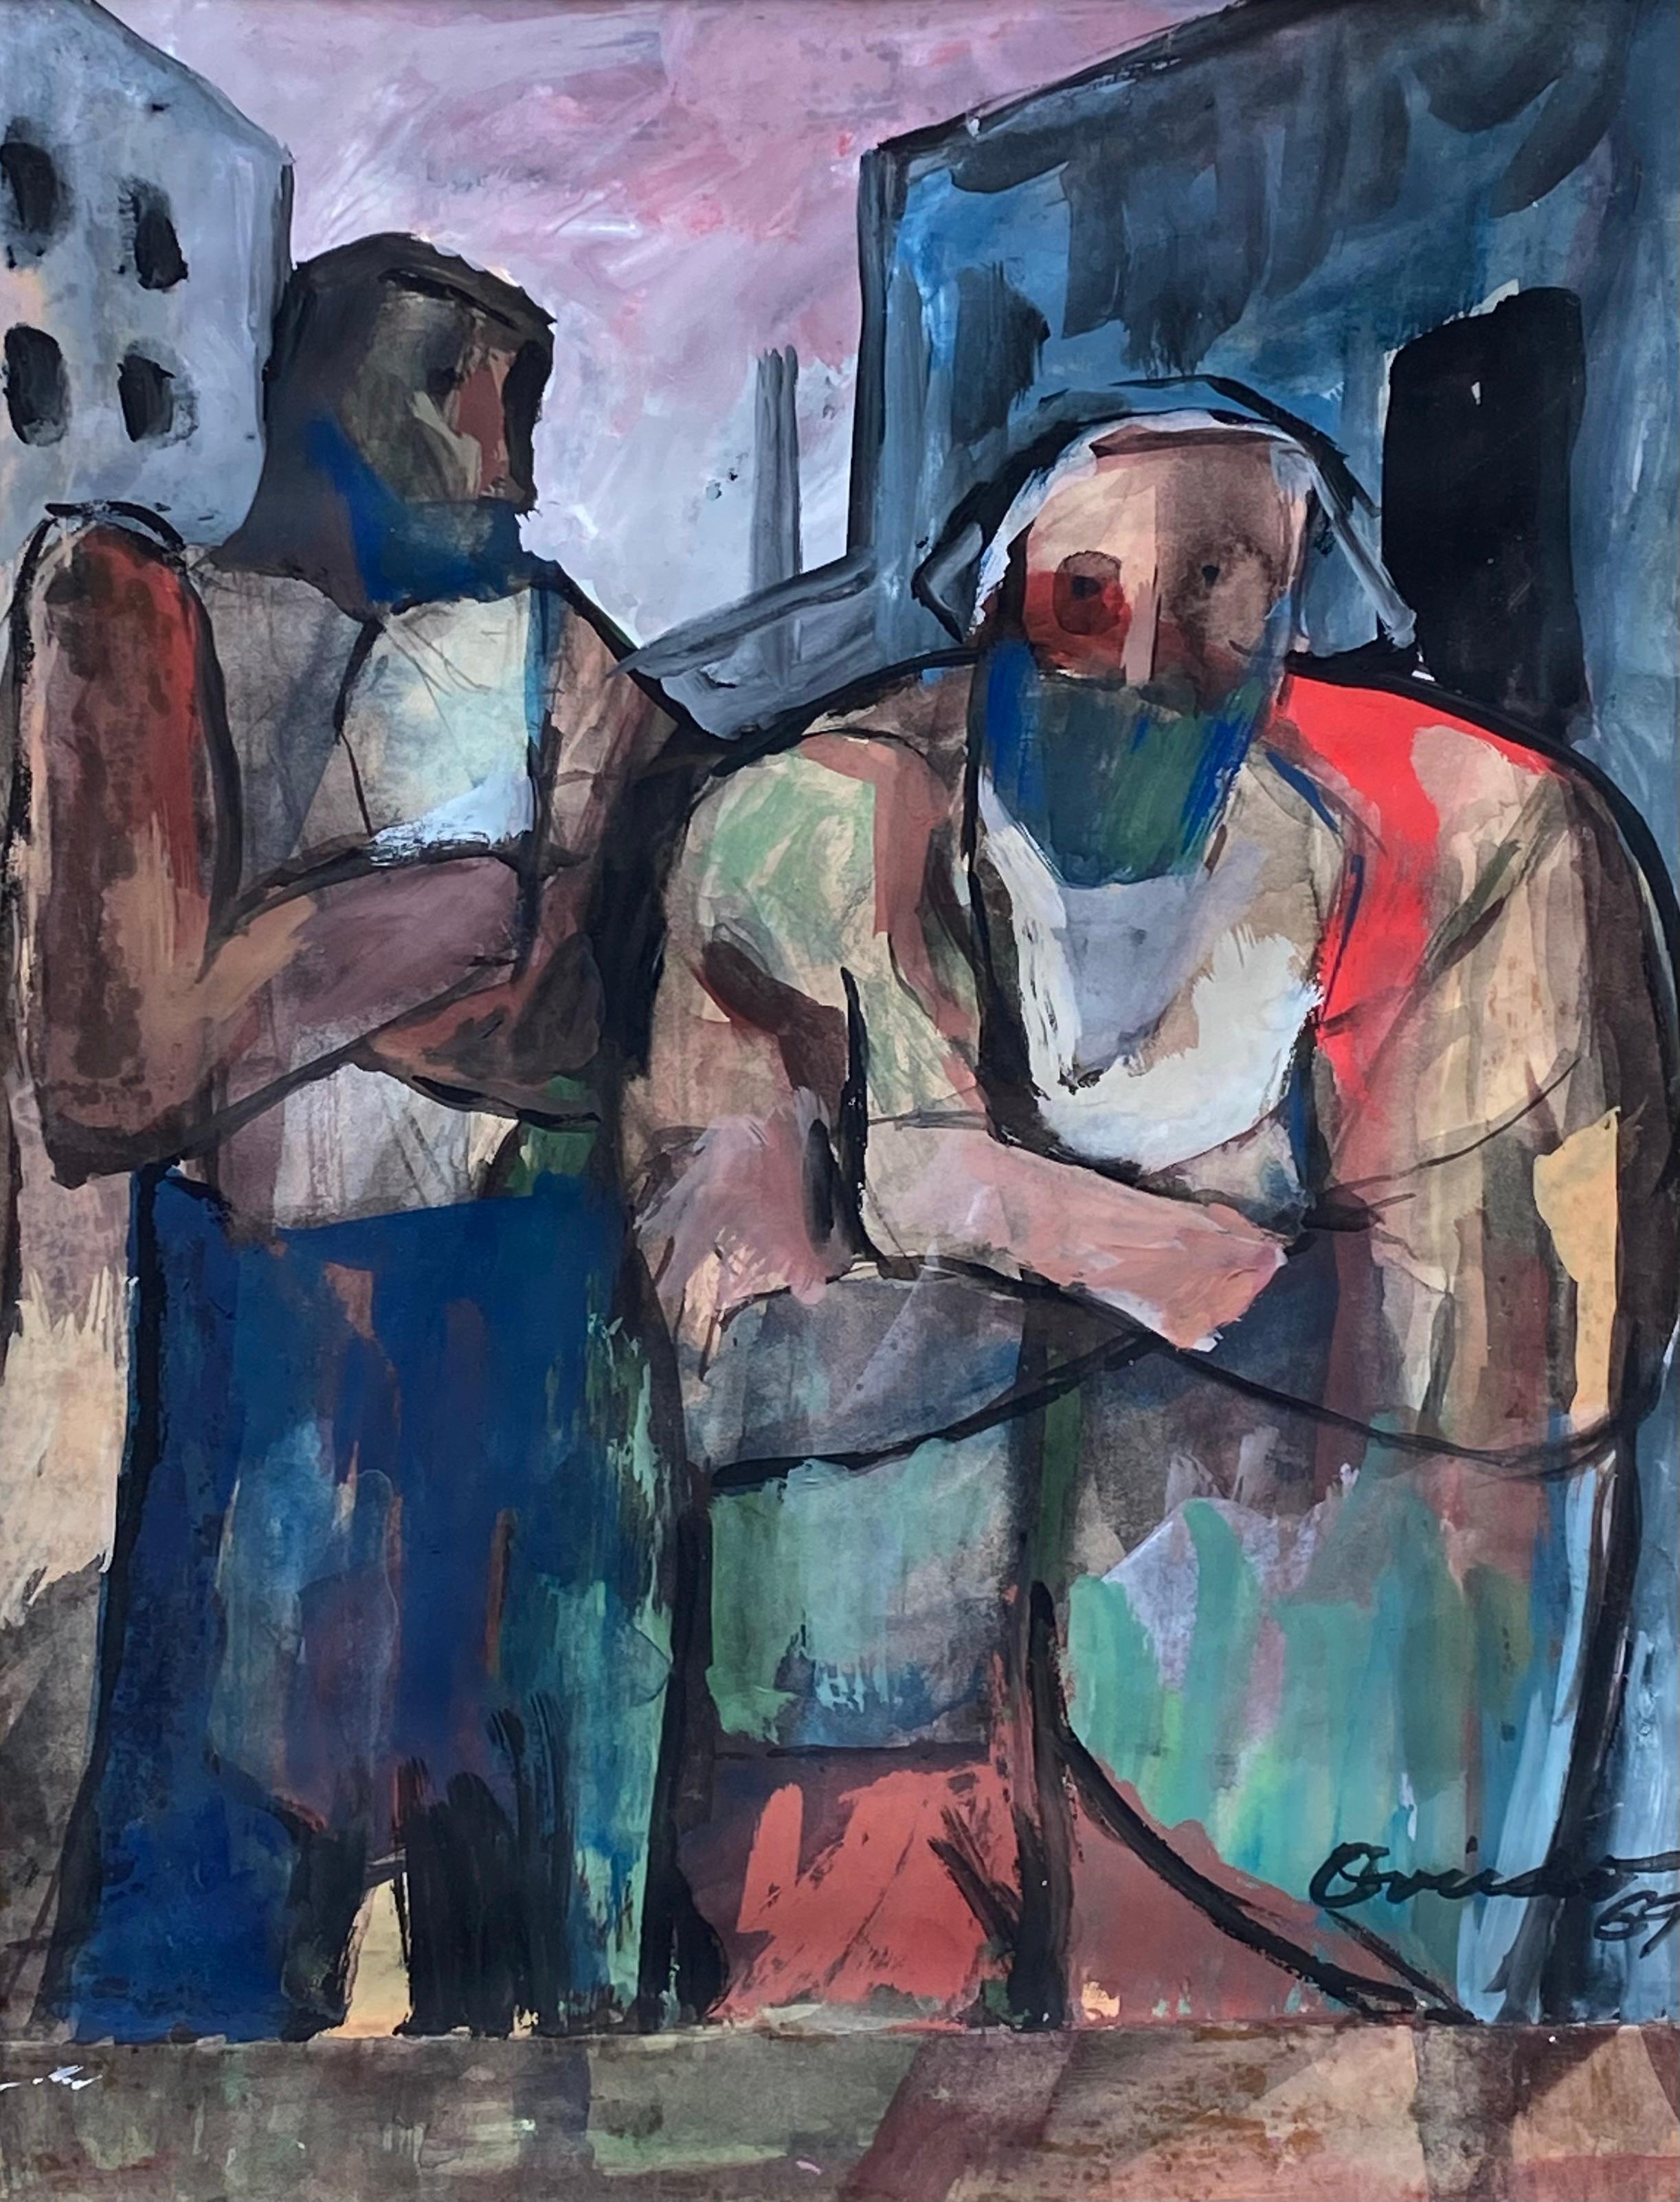 Watercolor, gouache and collage painting by the famous Dominican artist, Ramon Oviedo.  A early figurative work by the artist of two figures in a city setting.  Signed lower right and dated 1969.  Condition is excellent. The bottom one inch of the